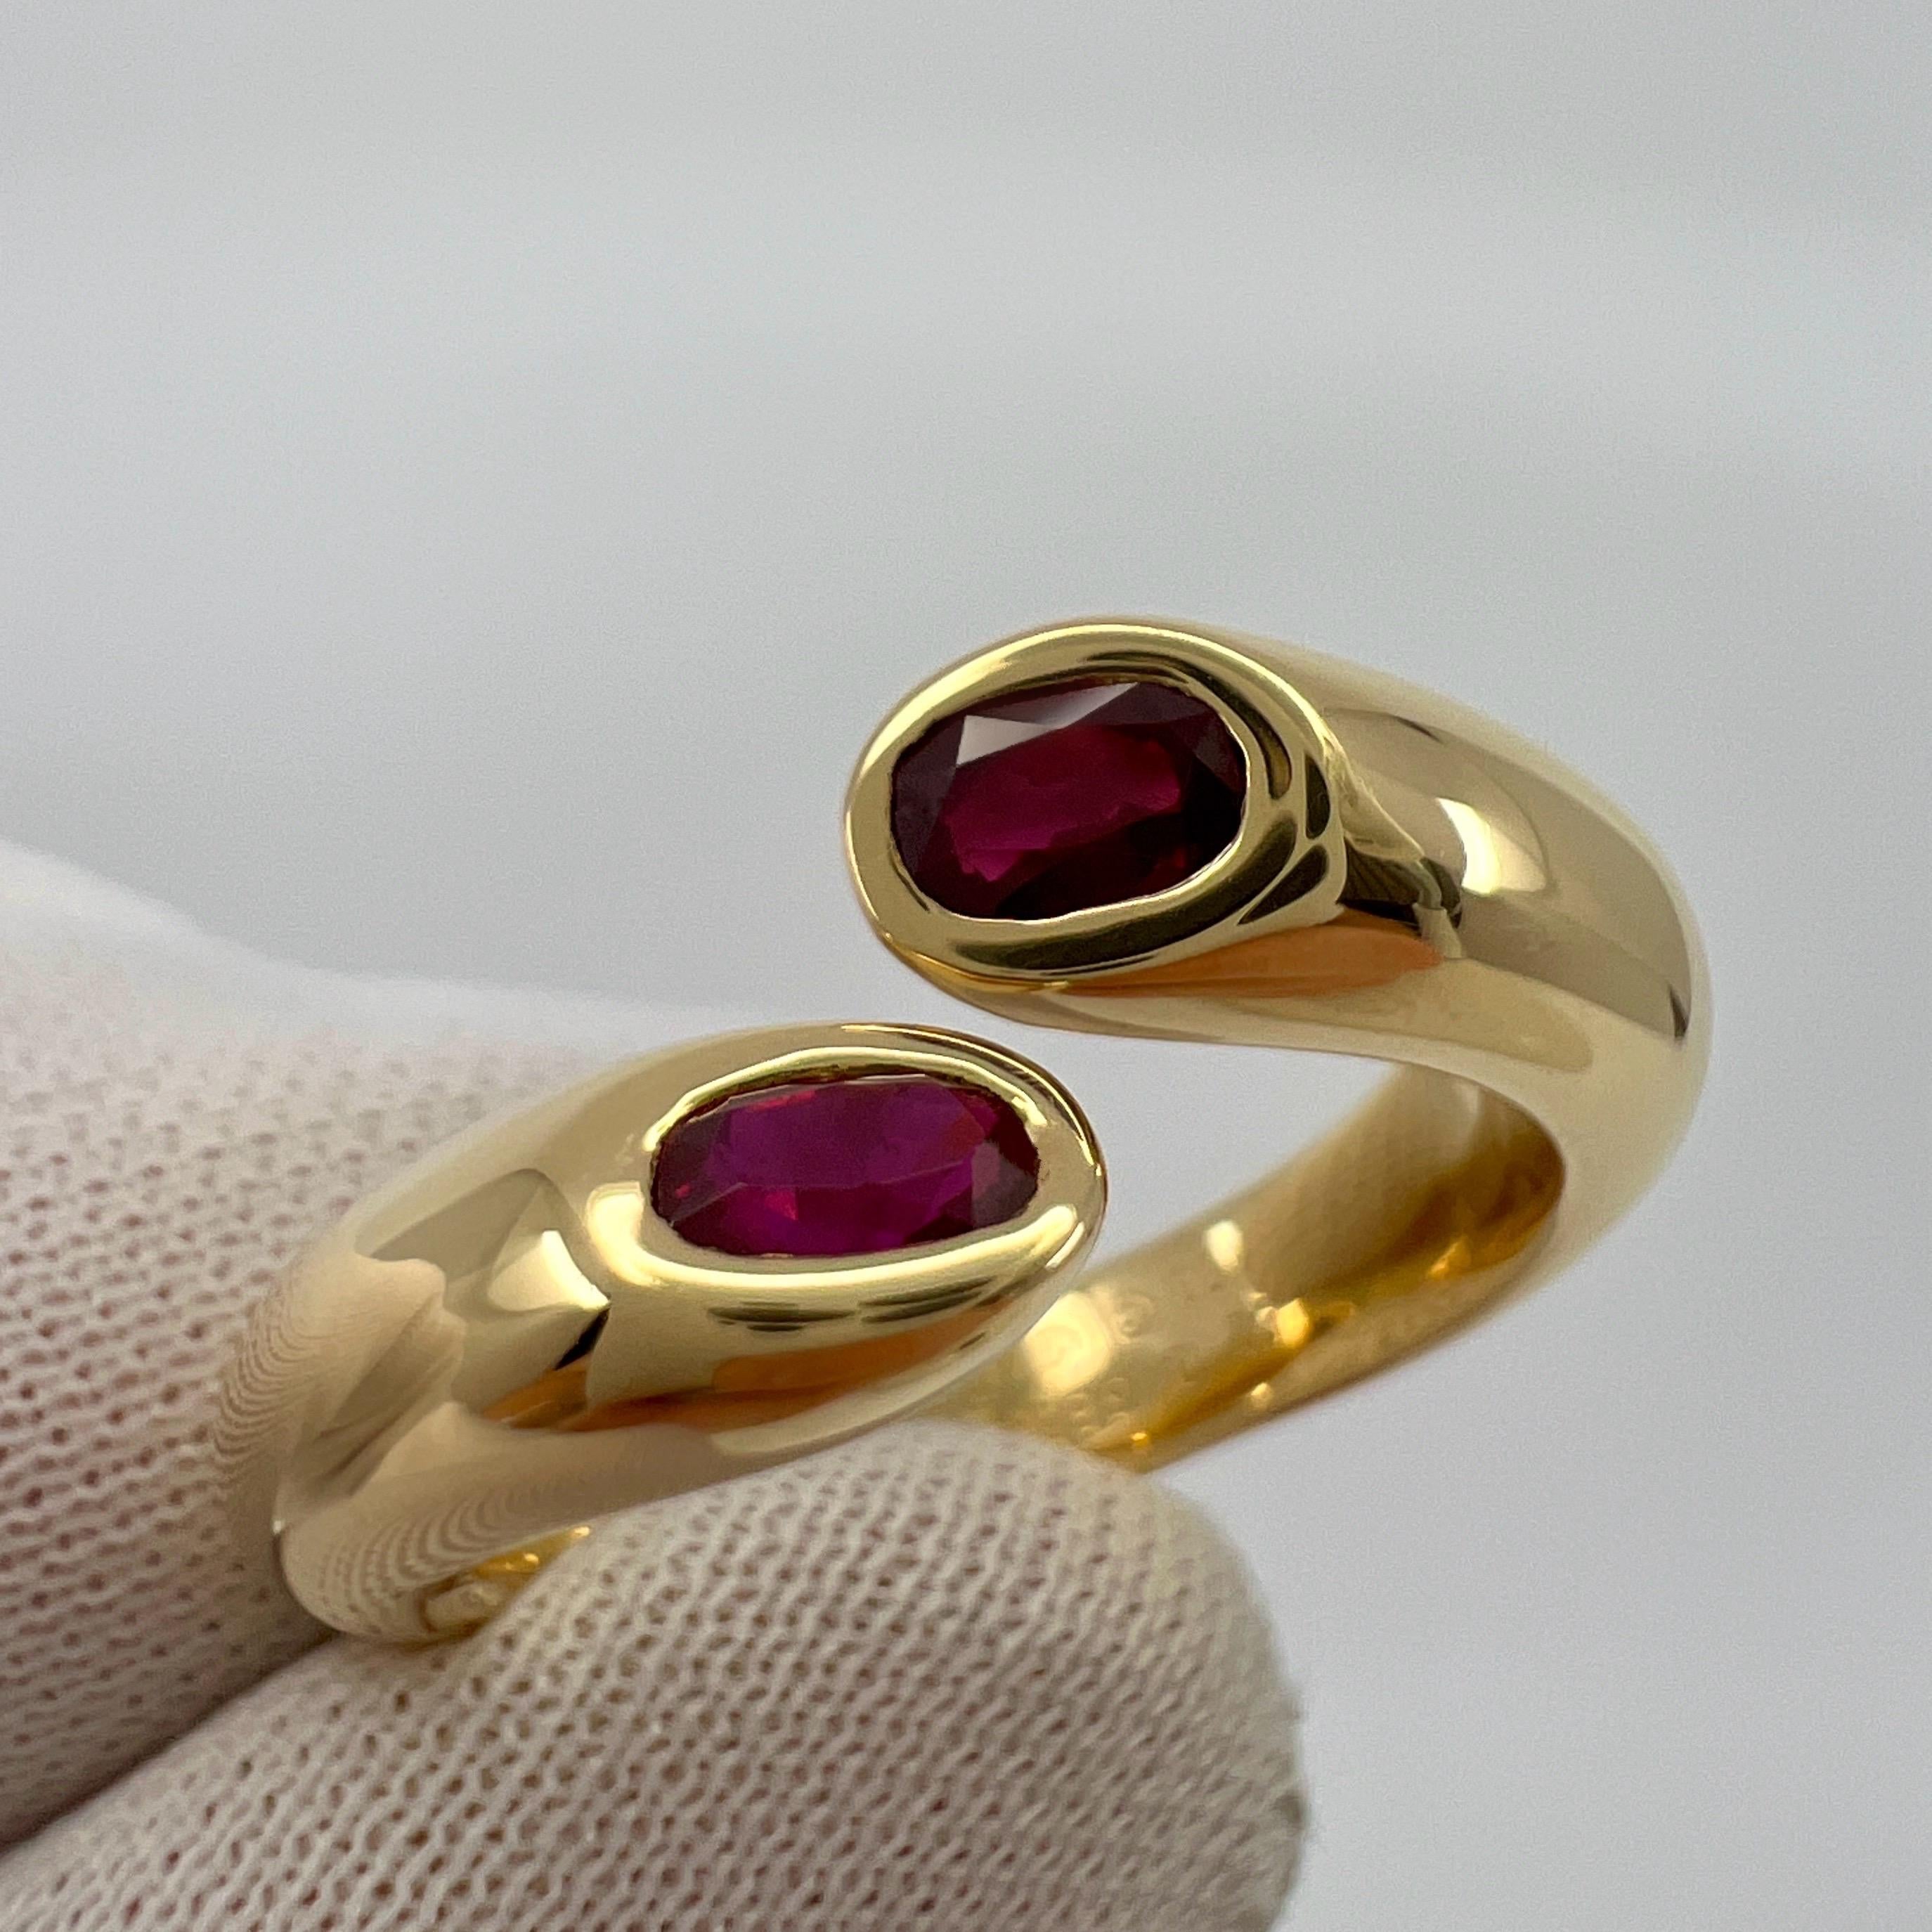 Rare Vintage Cartier Red Ruby Ellipse Oval Cut 18k Gold Bypass Split Ring 6 52 6